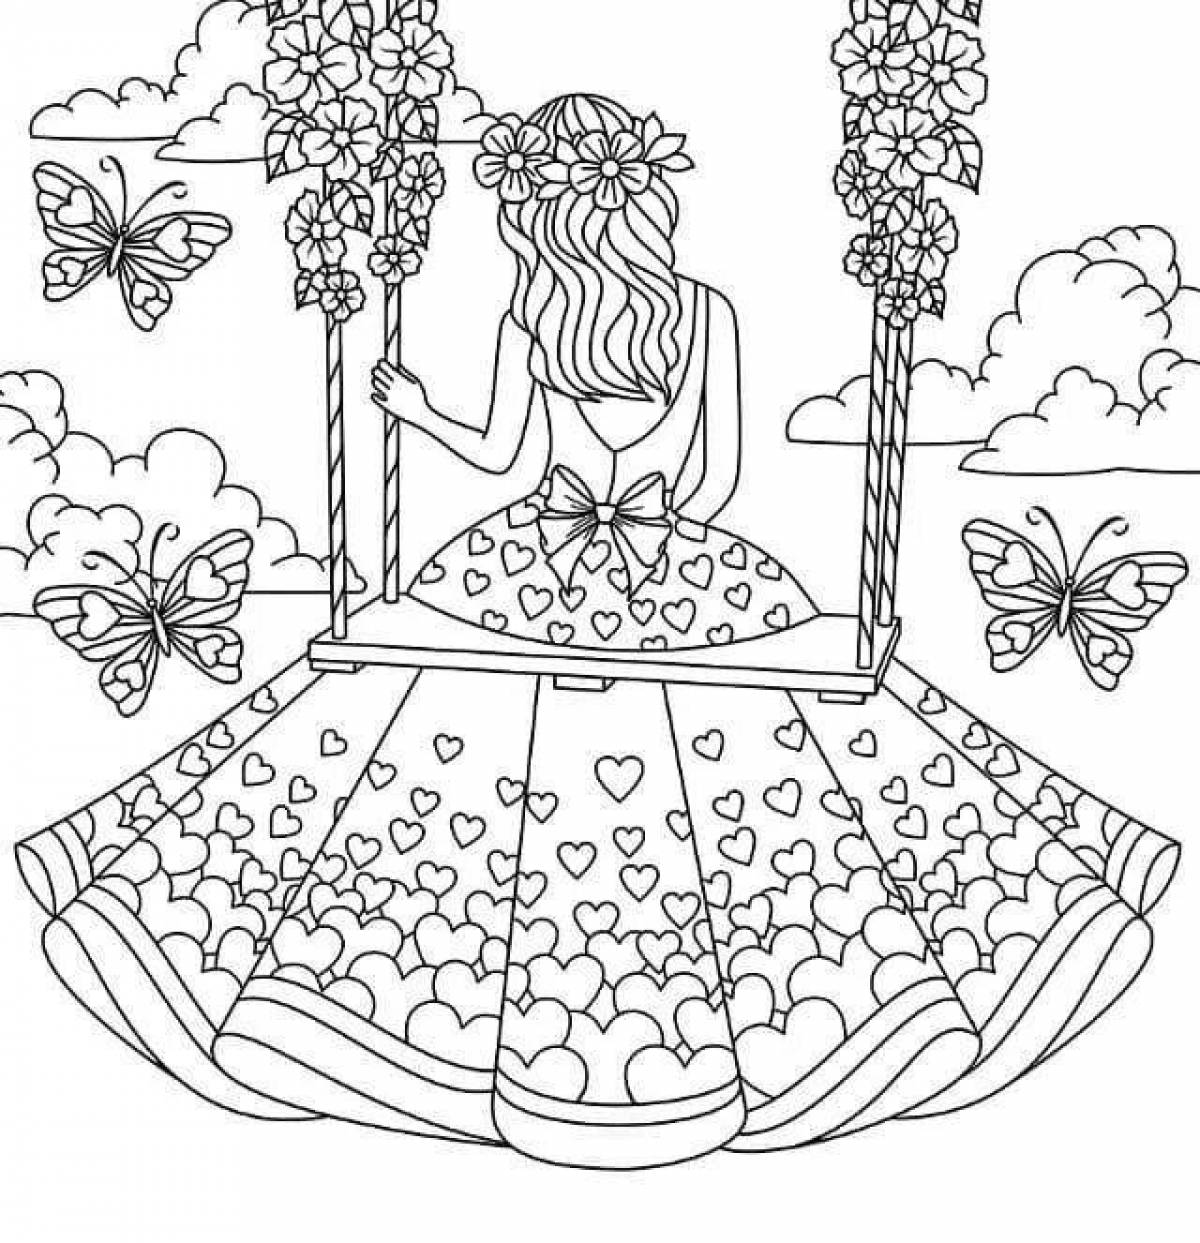 Dazzling coloring page 15 years old very beautiful